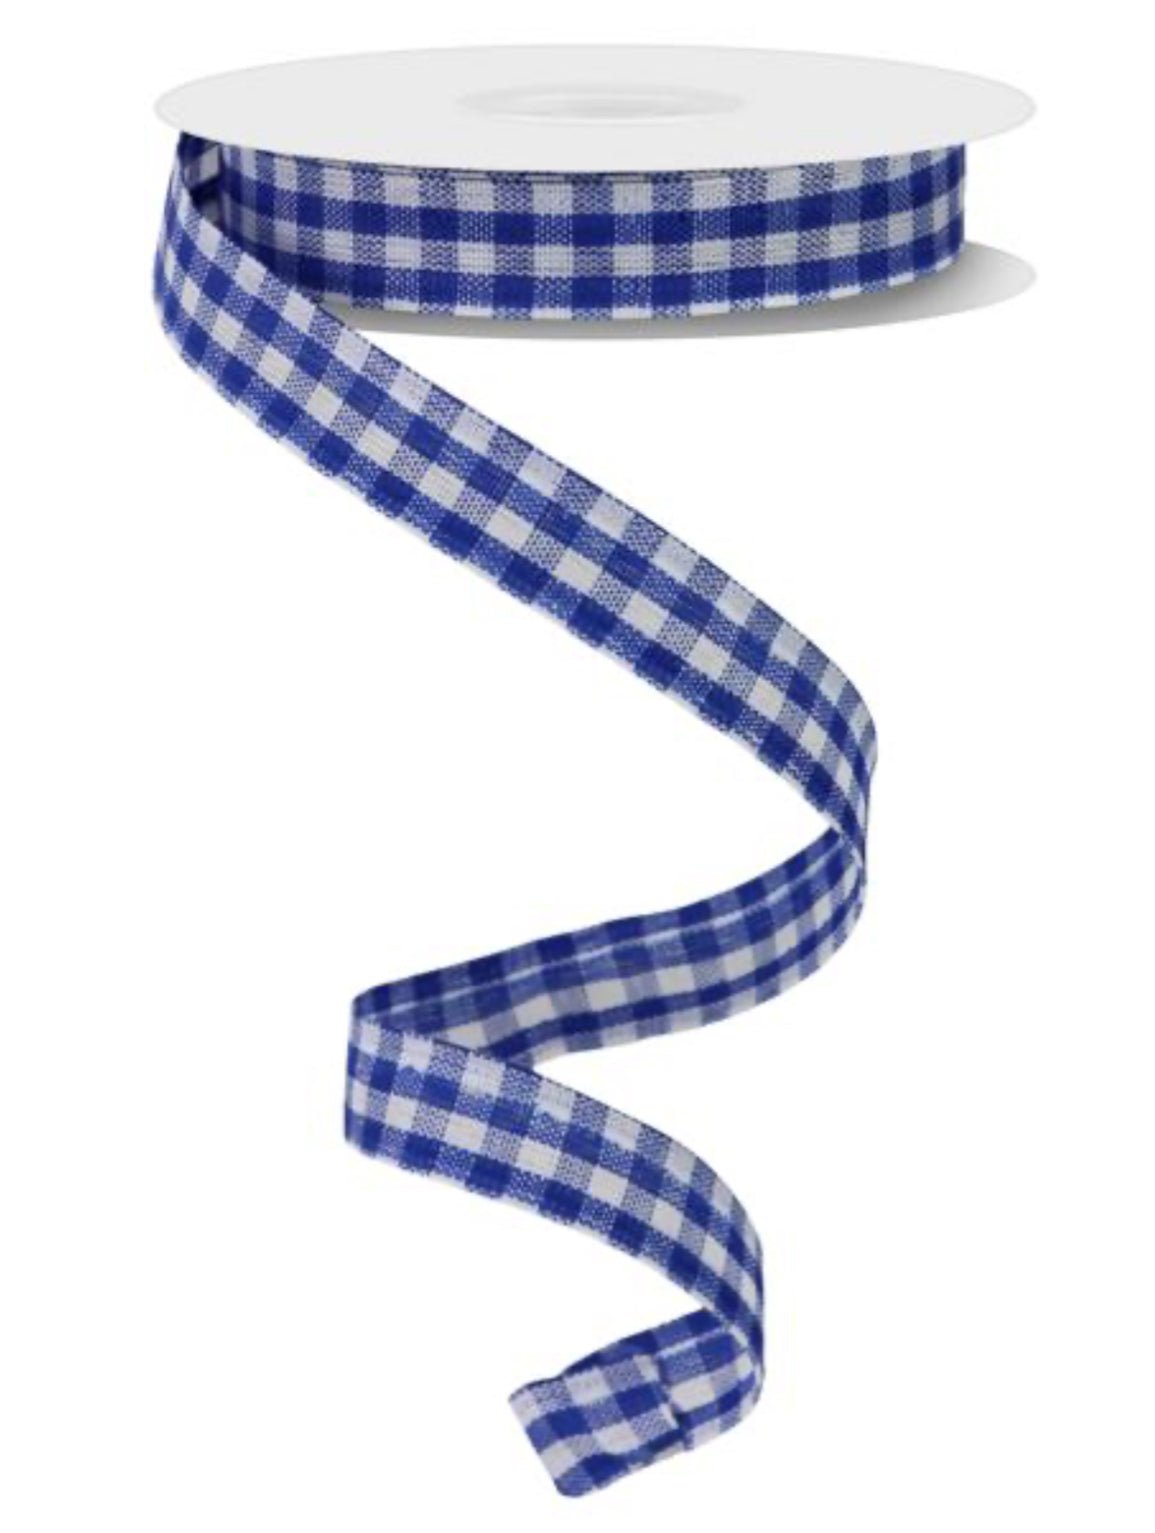 Blue and white classic Gingham wired ribbon, 5/8